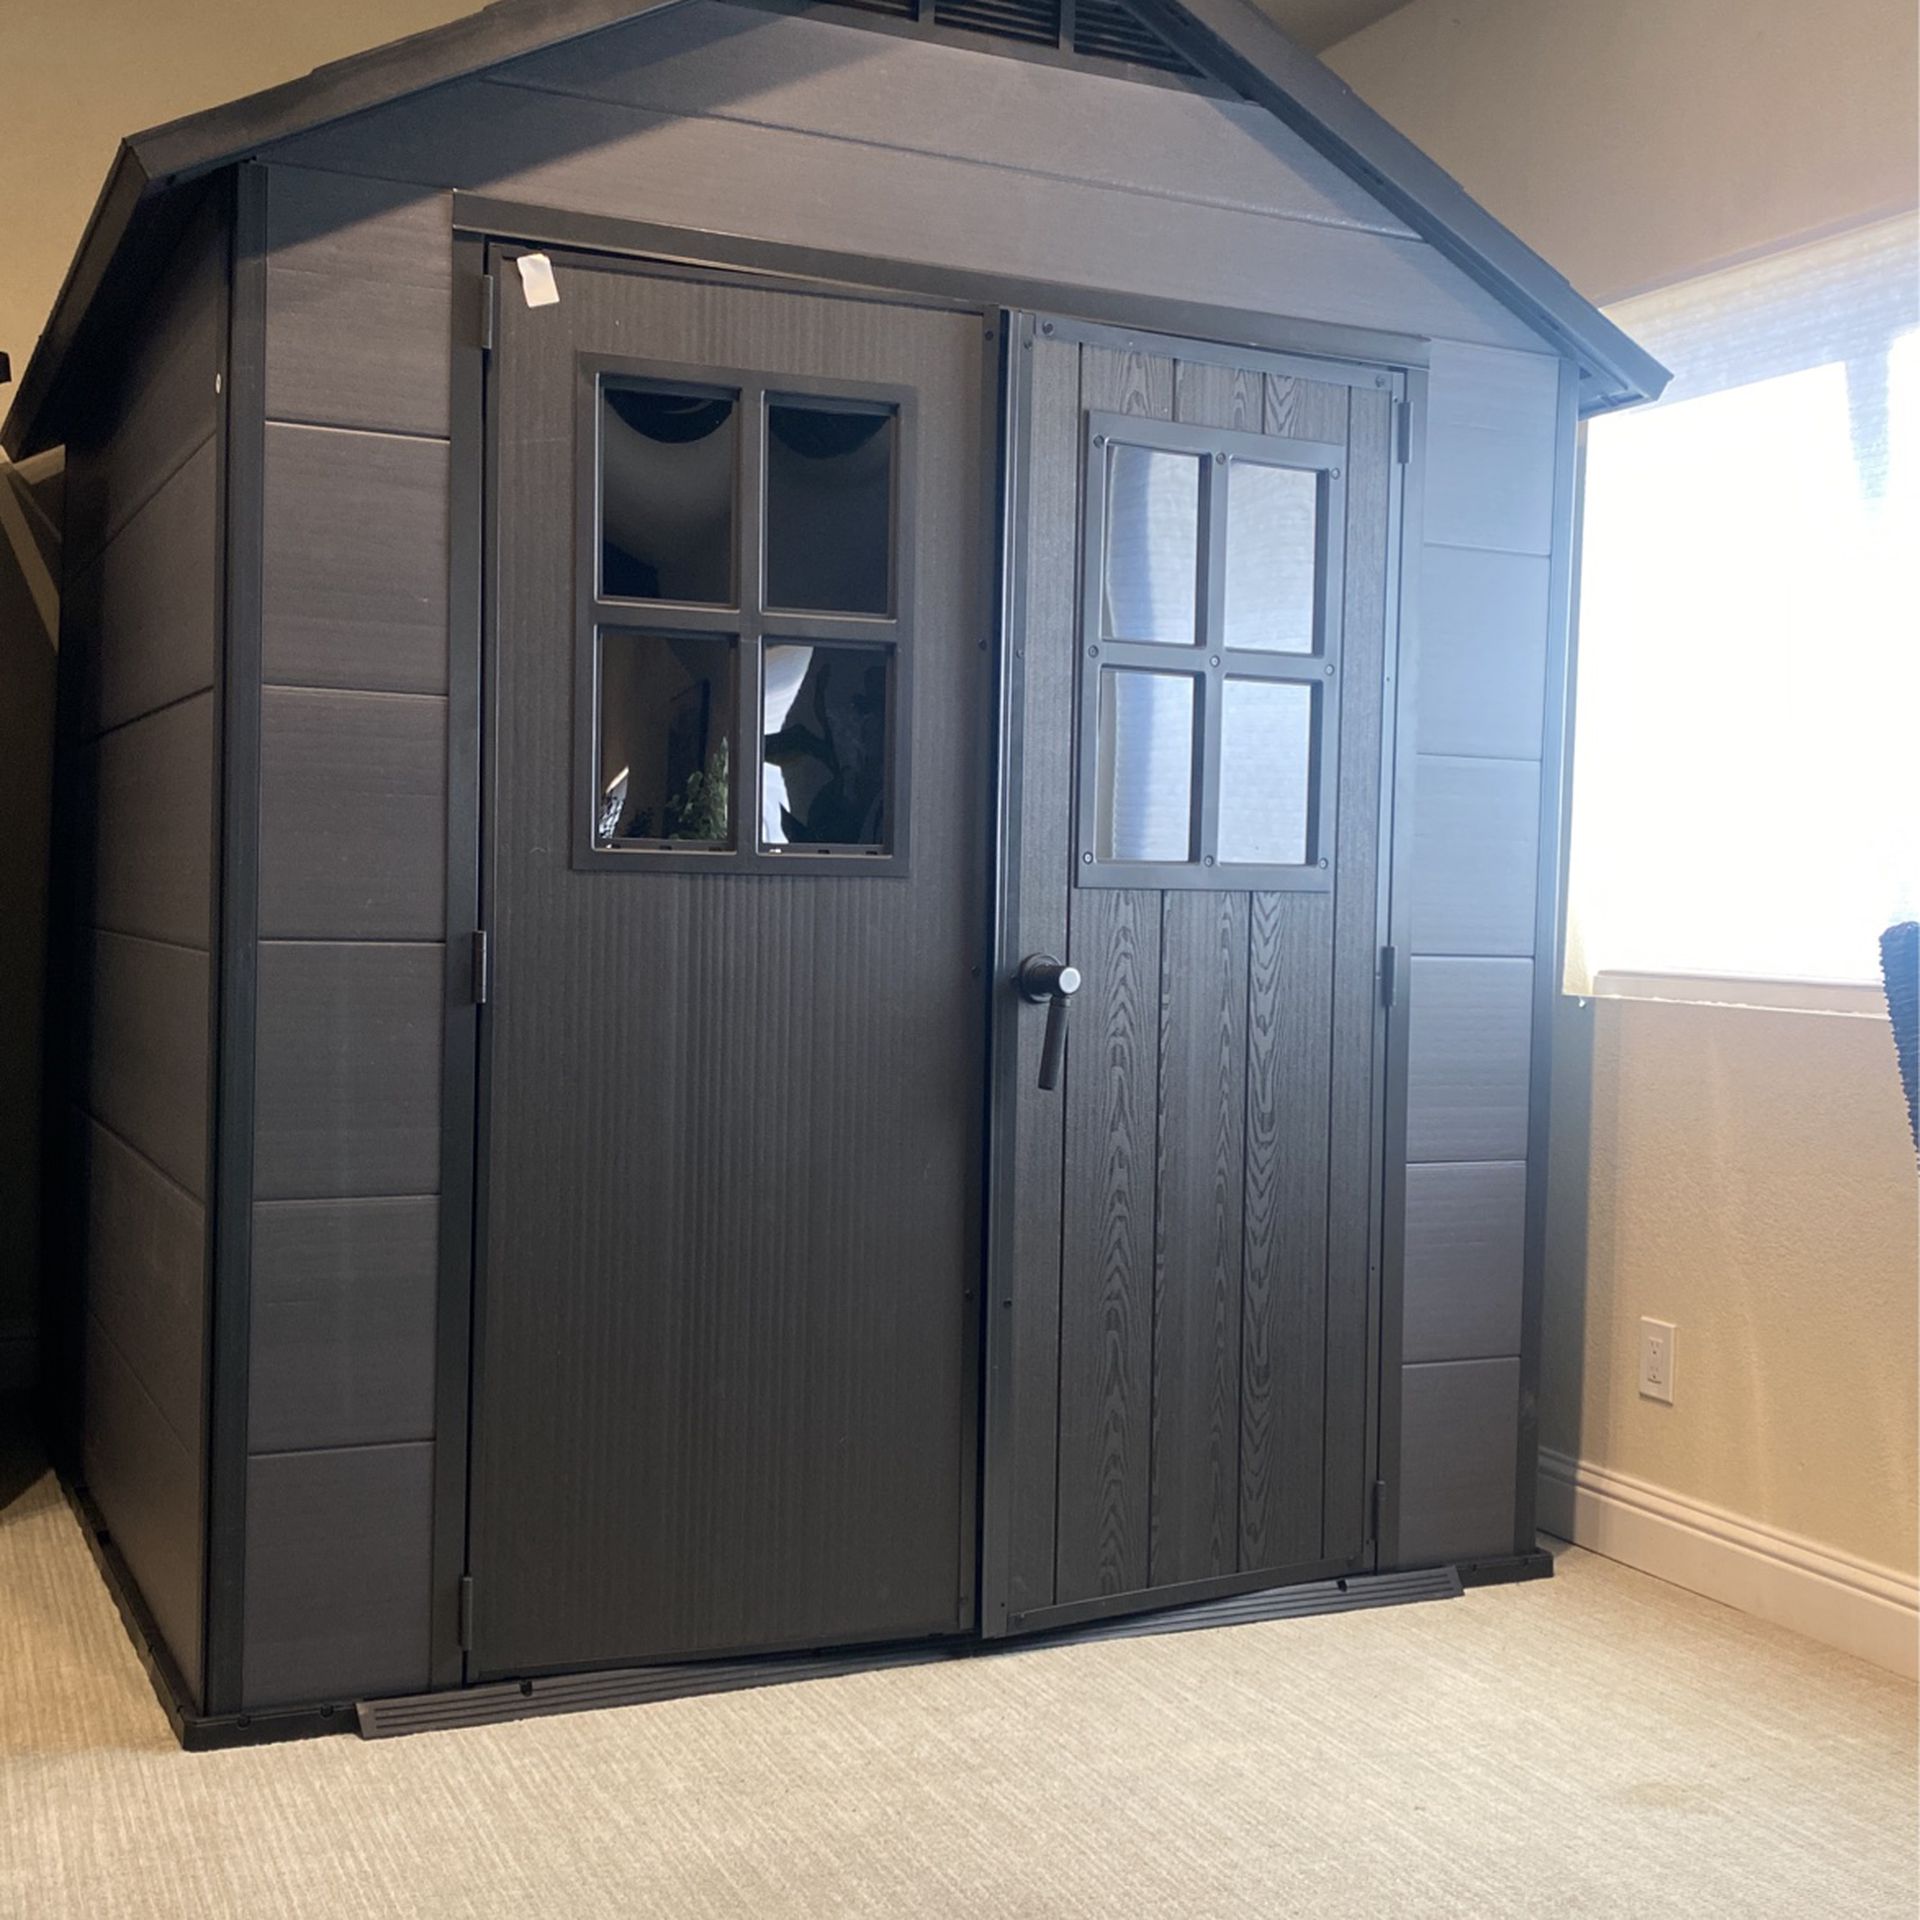 7.5x7 Shed